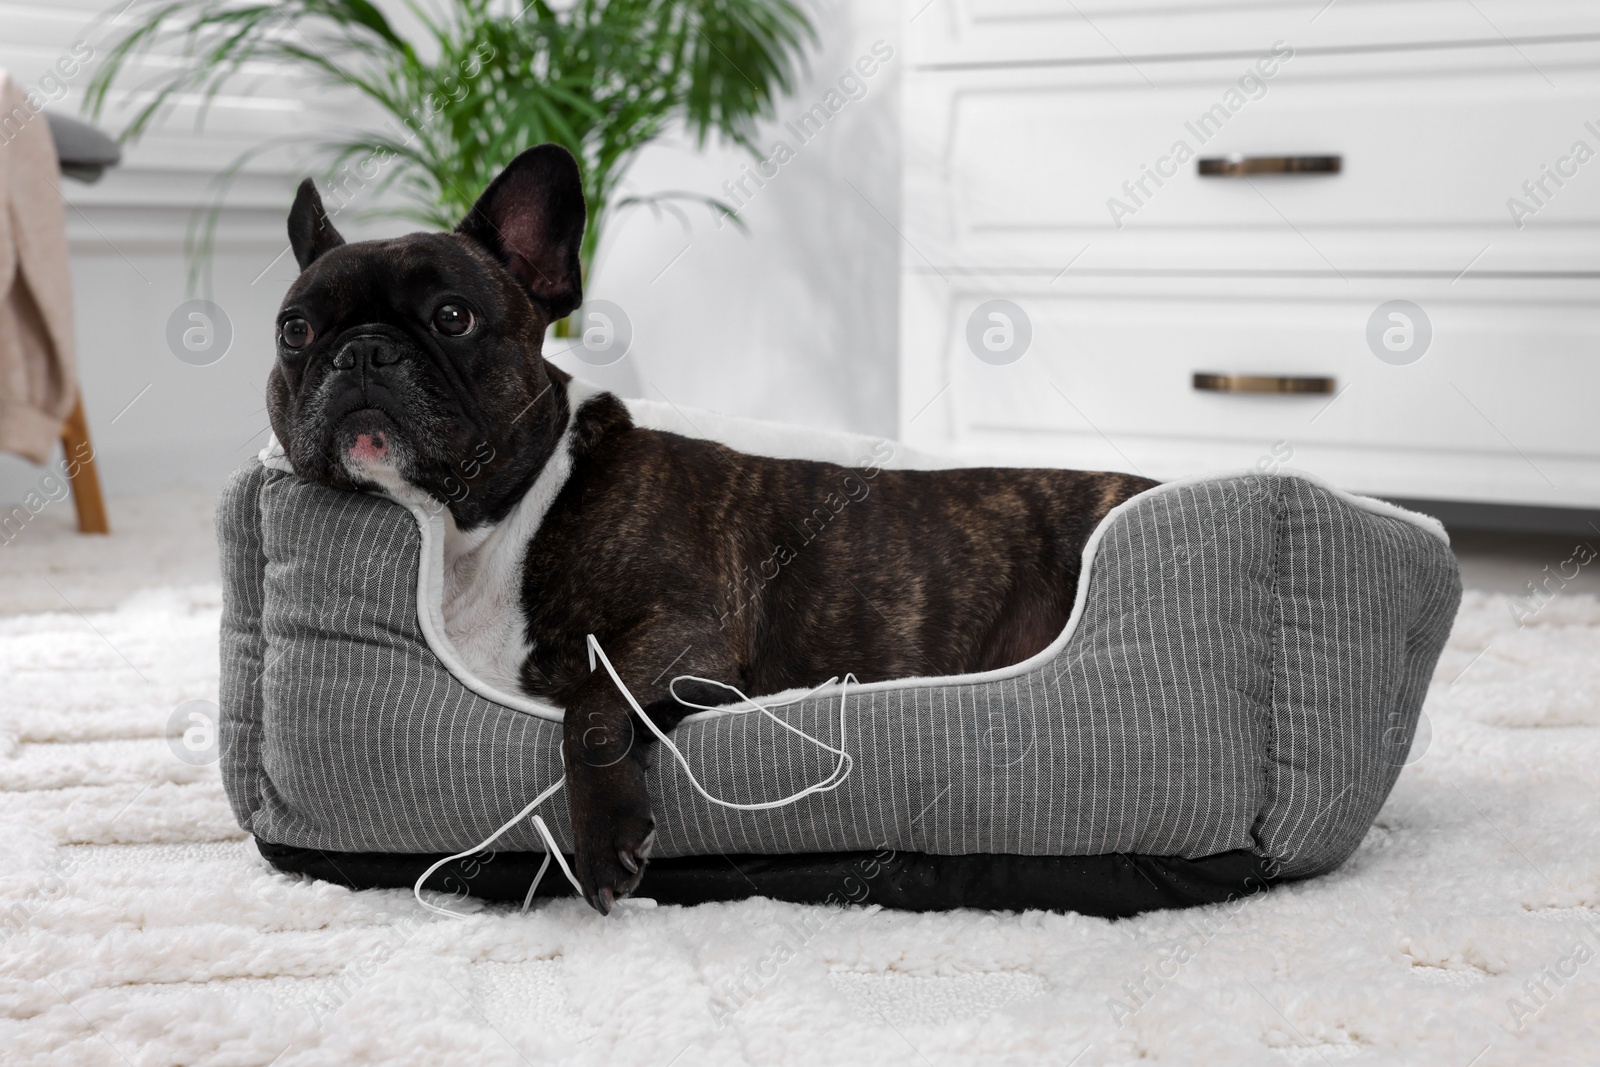 Photo of Naughty French Bulldog with damaged wired earphones on dog bed in room